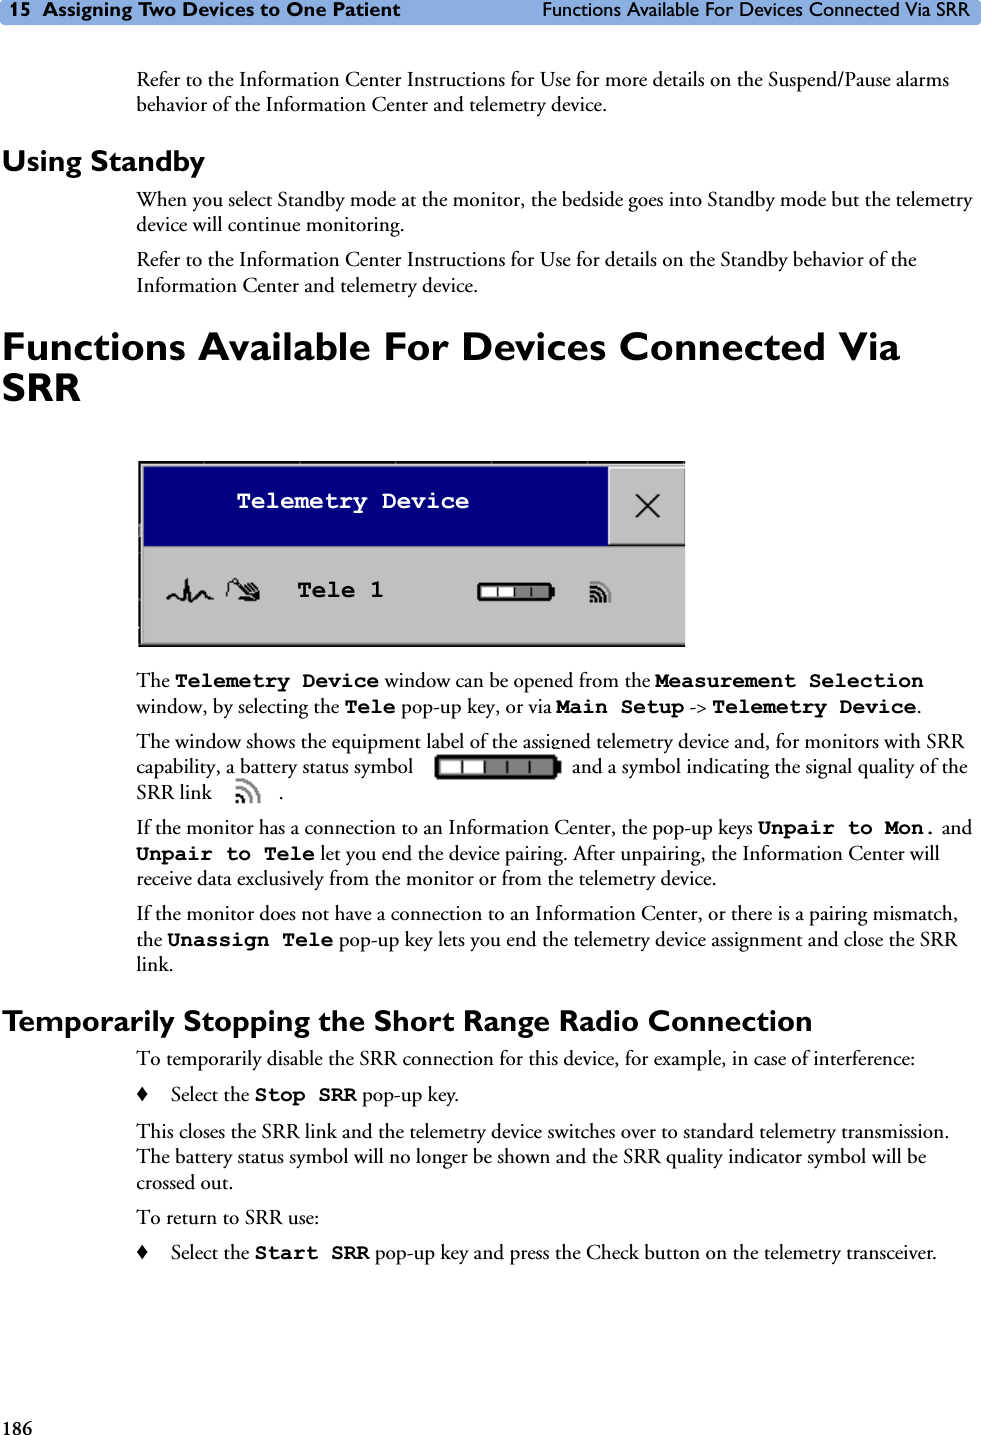 15 Assigning Two Devices to One Patient Functions Available For Devices Connected Via SRR186Refer to the Information Center Instructions for Use for more details on the Suspend/Pause alarms behavior of the Information Center and telemetry device. Using StandbyWhen you select Standby mode at the monitor, the bedside goes into Standby mode but the telemetry device will continue monitoring. Refer to the Information Center Instructions for Use for details on the Standby behavior of the Information Center and telemetry device. Functions Available For Devices Connected Via SRRThe Telemetry Device window can be opened from the Measurement Selection window, by selecting the Tele pop-up key, or via Main Setup -&gt; Telemetry Device.The window shows the equipment label of the assigned telemetry device and, for monitors with SRR capability, a battery status symbol   and a symbol indicating the signal quality of the SRR link  . If the monitor has a connection to an Information Center, the pop-up keys Unpair to Mon. and Unpair to Tele let you end the device pairing. After unpairing, the Information Center will receive data exclusively from the monitor or from the telemetry device.If the monitor does not have a connection to an Information Center, or there is a pairing mismatch, the Unassign Tele pop-up key lets you end the telemetry device assignment and close the SRR link.Temporarily Stopping the Short Range Radio ConnectionTo temporarily disable the SRR connection for this device, for example, in case of interference:♦Select the Stop SRR pop-up key.This closes the SRR link and the telemetry device switches over to standard telemetry transmission. The battery status symbol will no longer be shown and the SRR quality indicator symbol will be crossed out.To return to SRR use:♦Select the Start SRR pop-up key and press the Check button on the telemetry transceiver.Telemetry DeviceTele 1